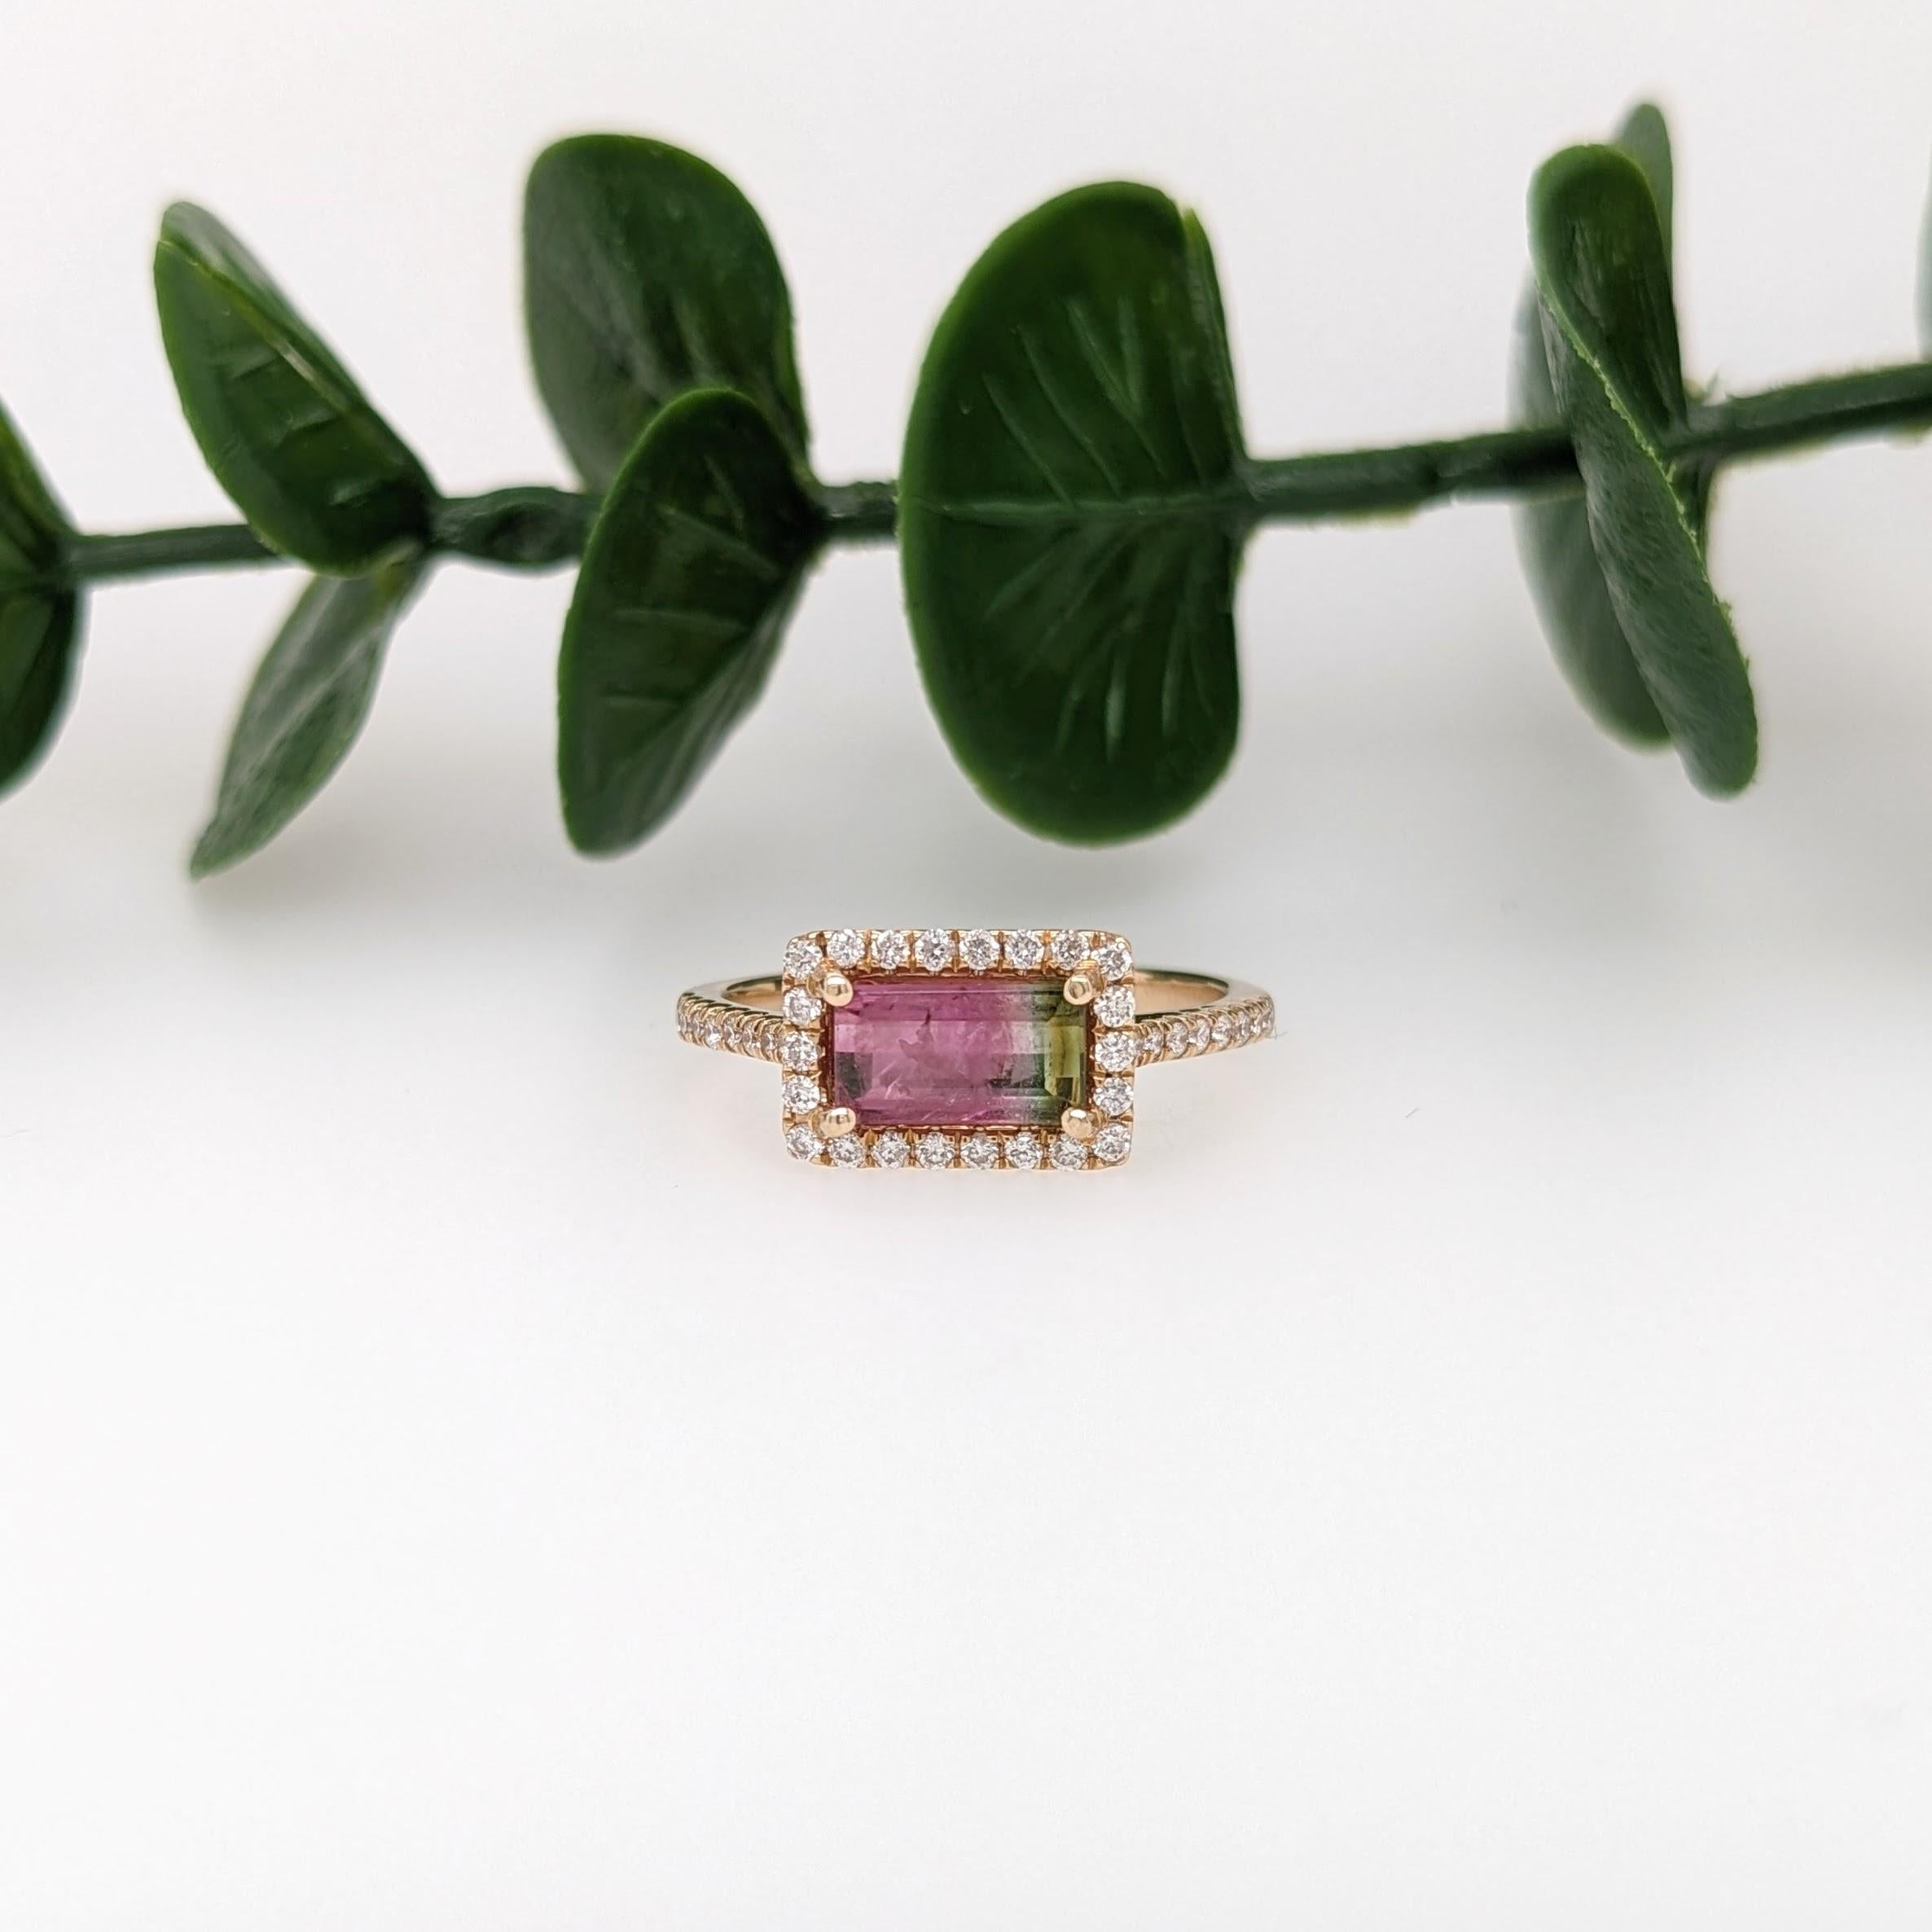 A unique watermelon tourmaline ring with an east west setting in 14k yellow gold. A deep and elegant presentation of greens and pinks highlighted by a sparling diamond halo and pave shank. Great as a statement piece for any formal